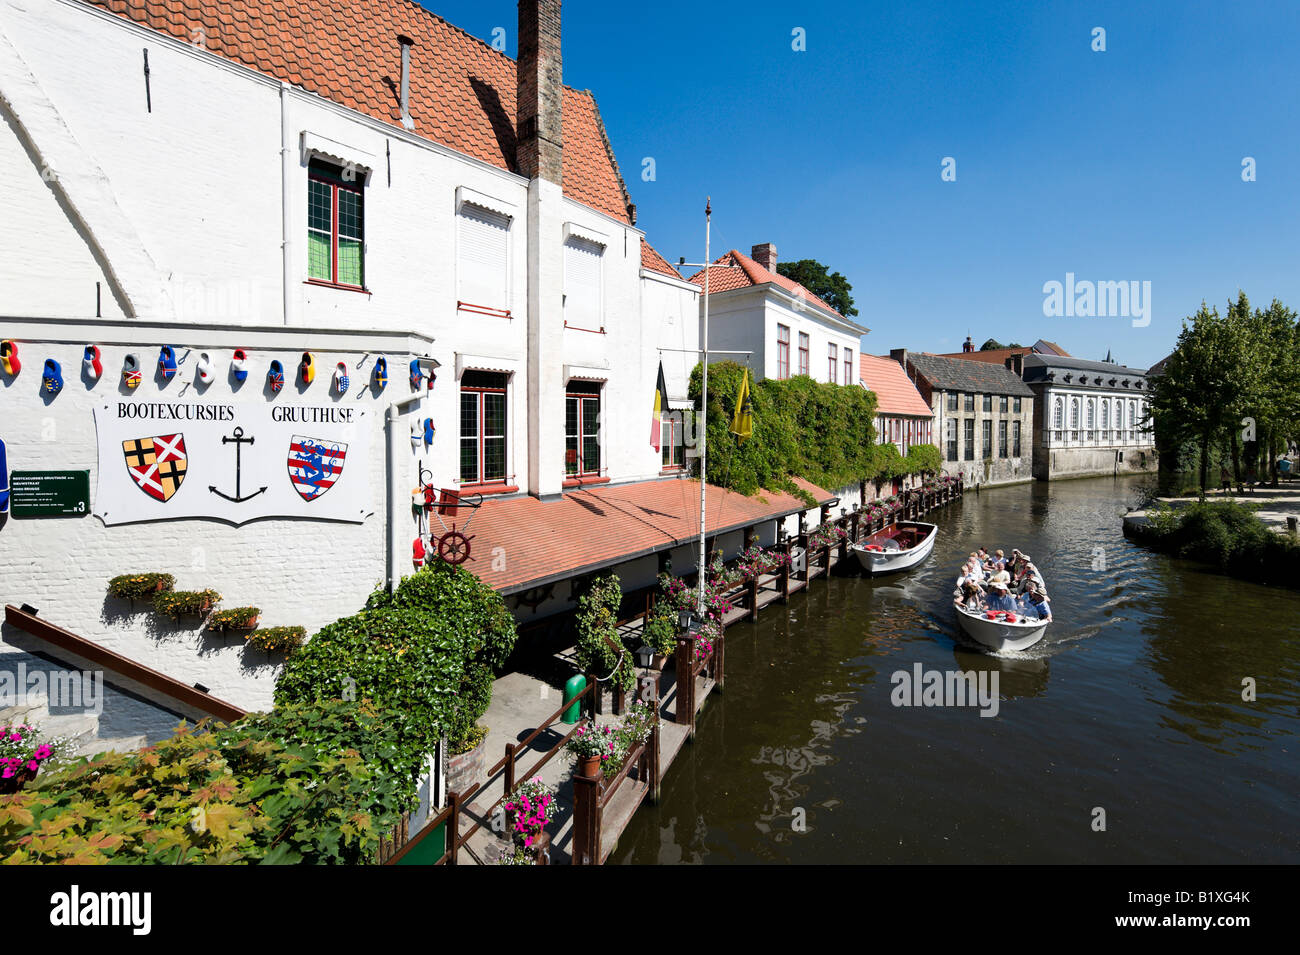 Boat trip on a canal in the old town centre, Bruges, Belgium Stock Photo